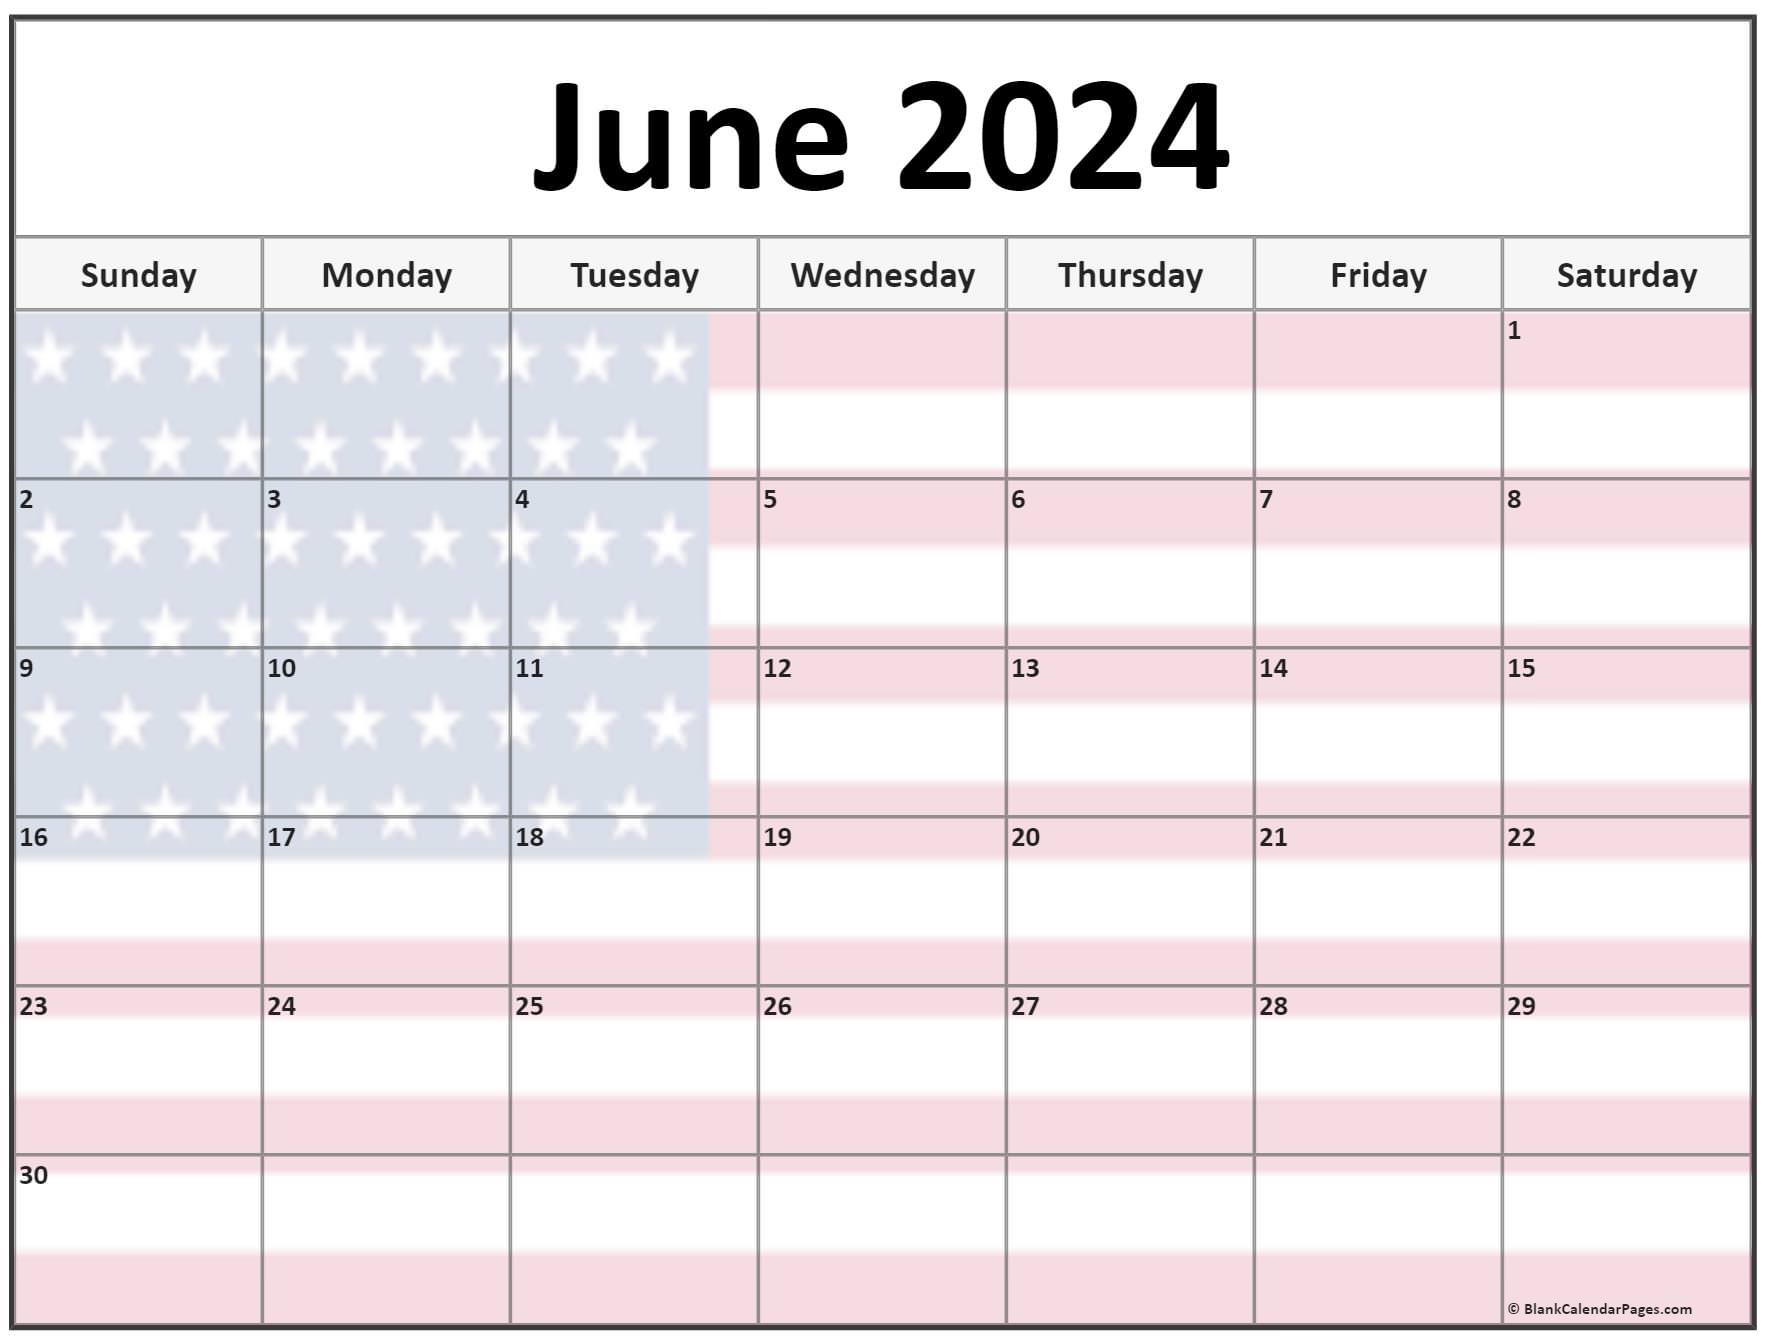 collection-of-june-2024-photo-calendars-with-image-filters